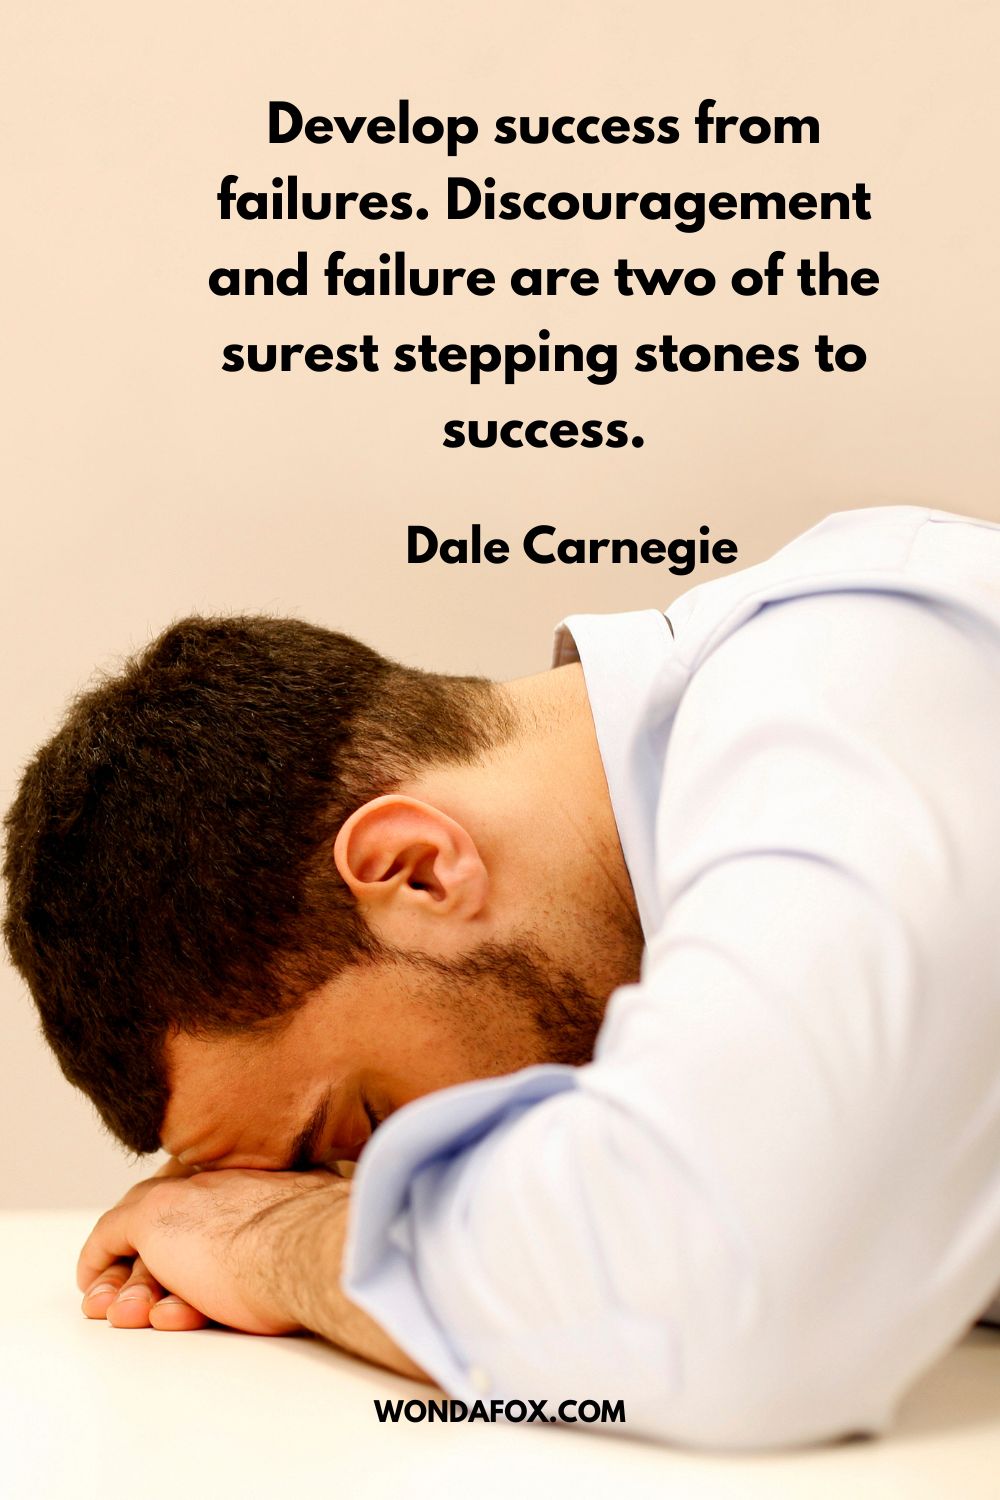 Develop success from failures. Discouragement and failure are two of the surest stepping stones to success. Dale Carnegie